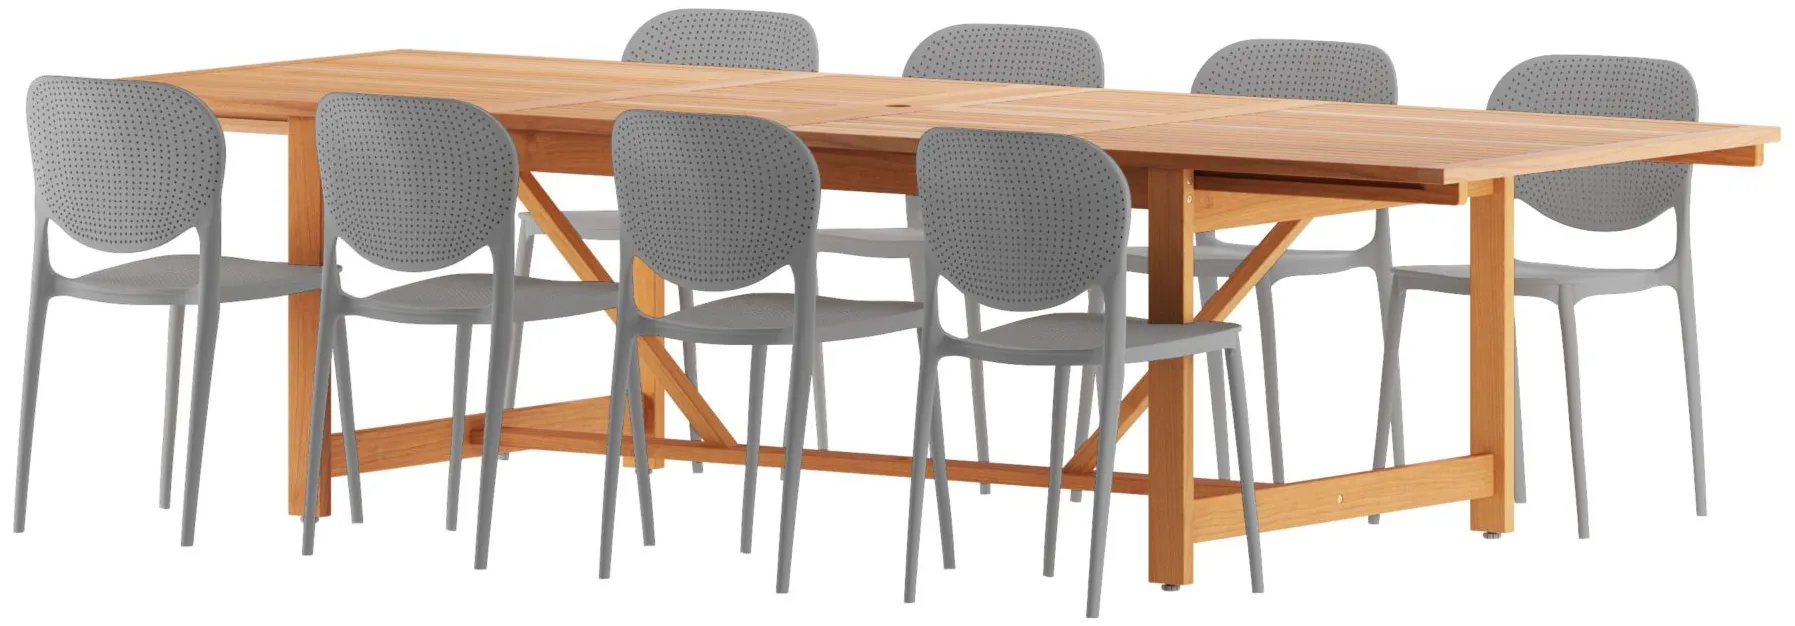 Amazonia Outdoor 9- pc. Eucalyptus Wood Dining Set in Brown;Gray by International Home Miami